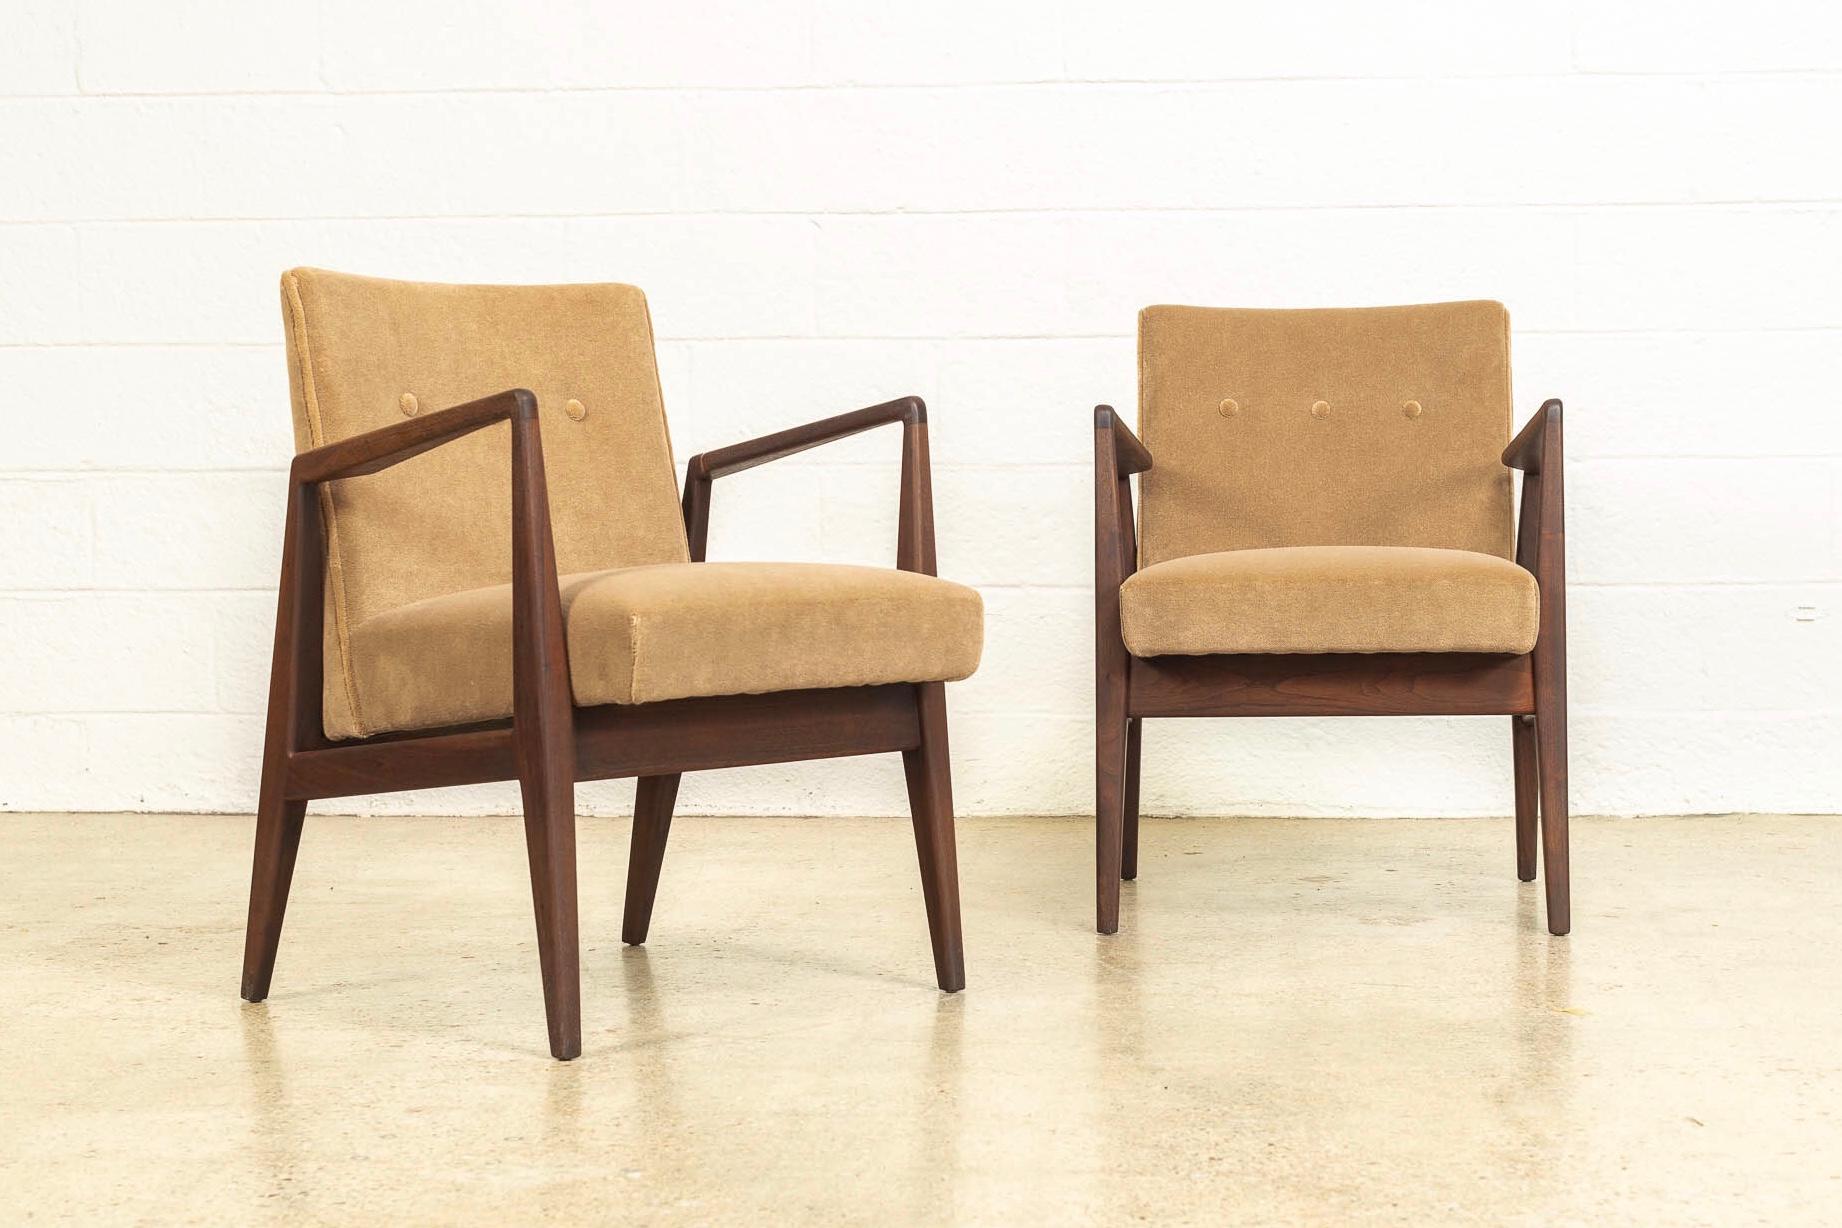 Upholstery Midcentury Jens Risom Walnut Wood and Upholstered Lounge Armchairs, a Pair For Sale